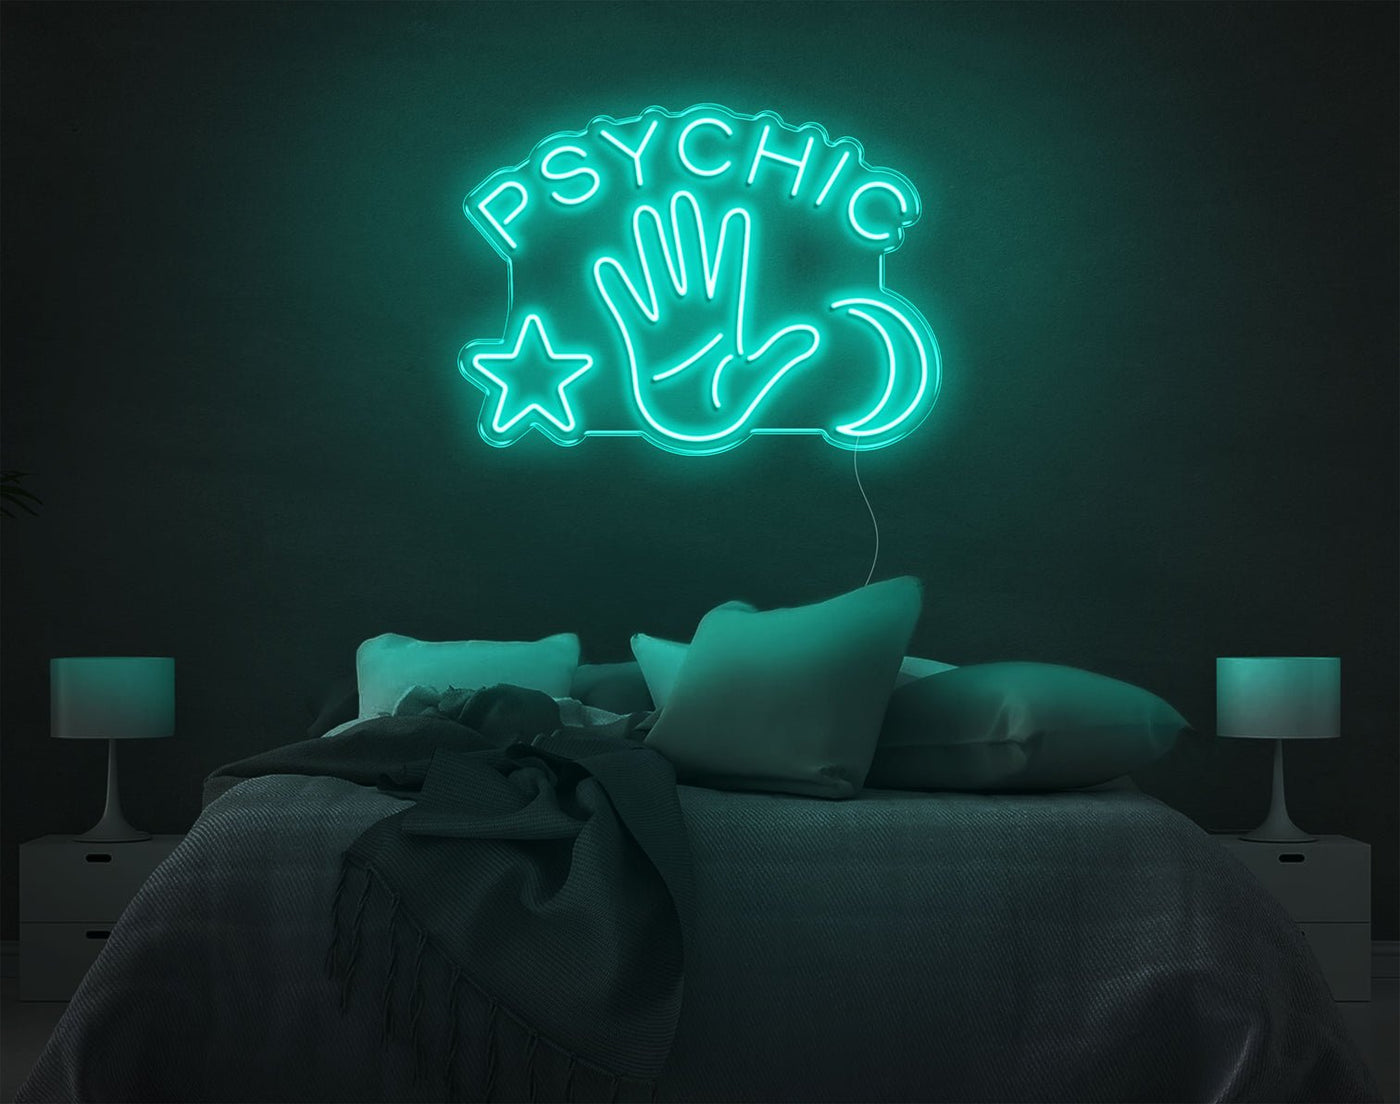 Psychic LED Neon Sign - 20inch x 28inchTurquoise